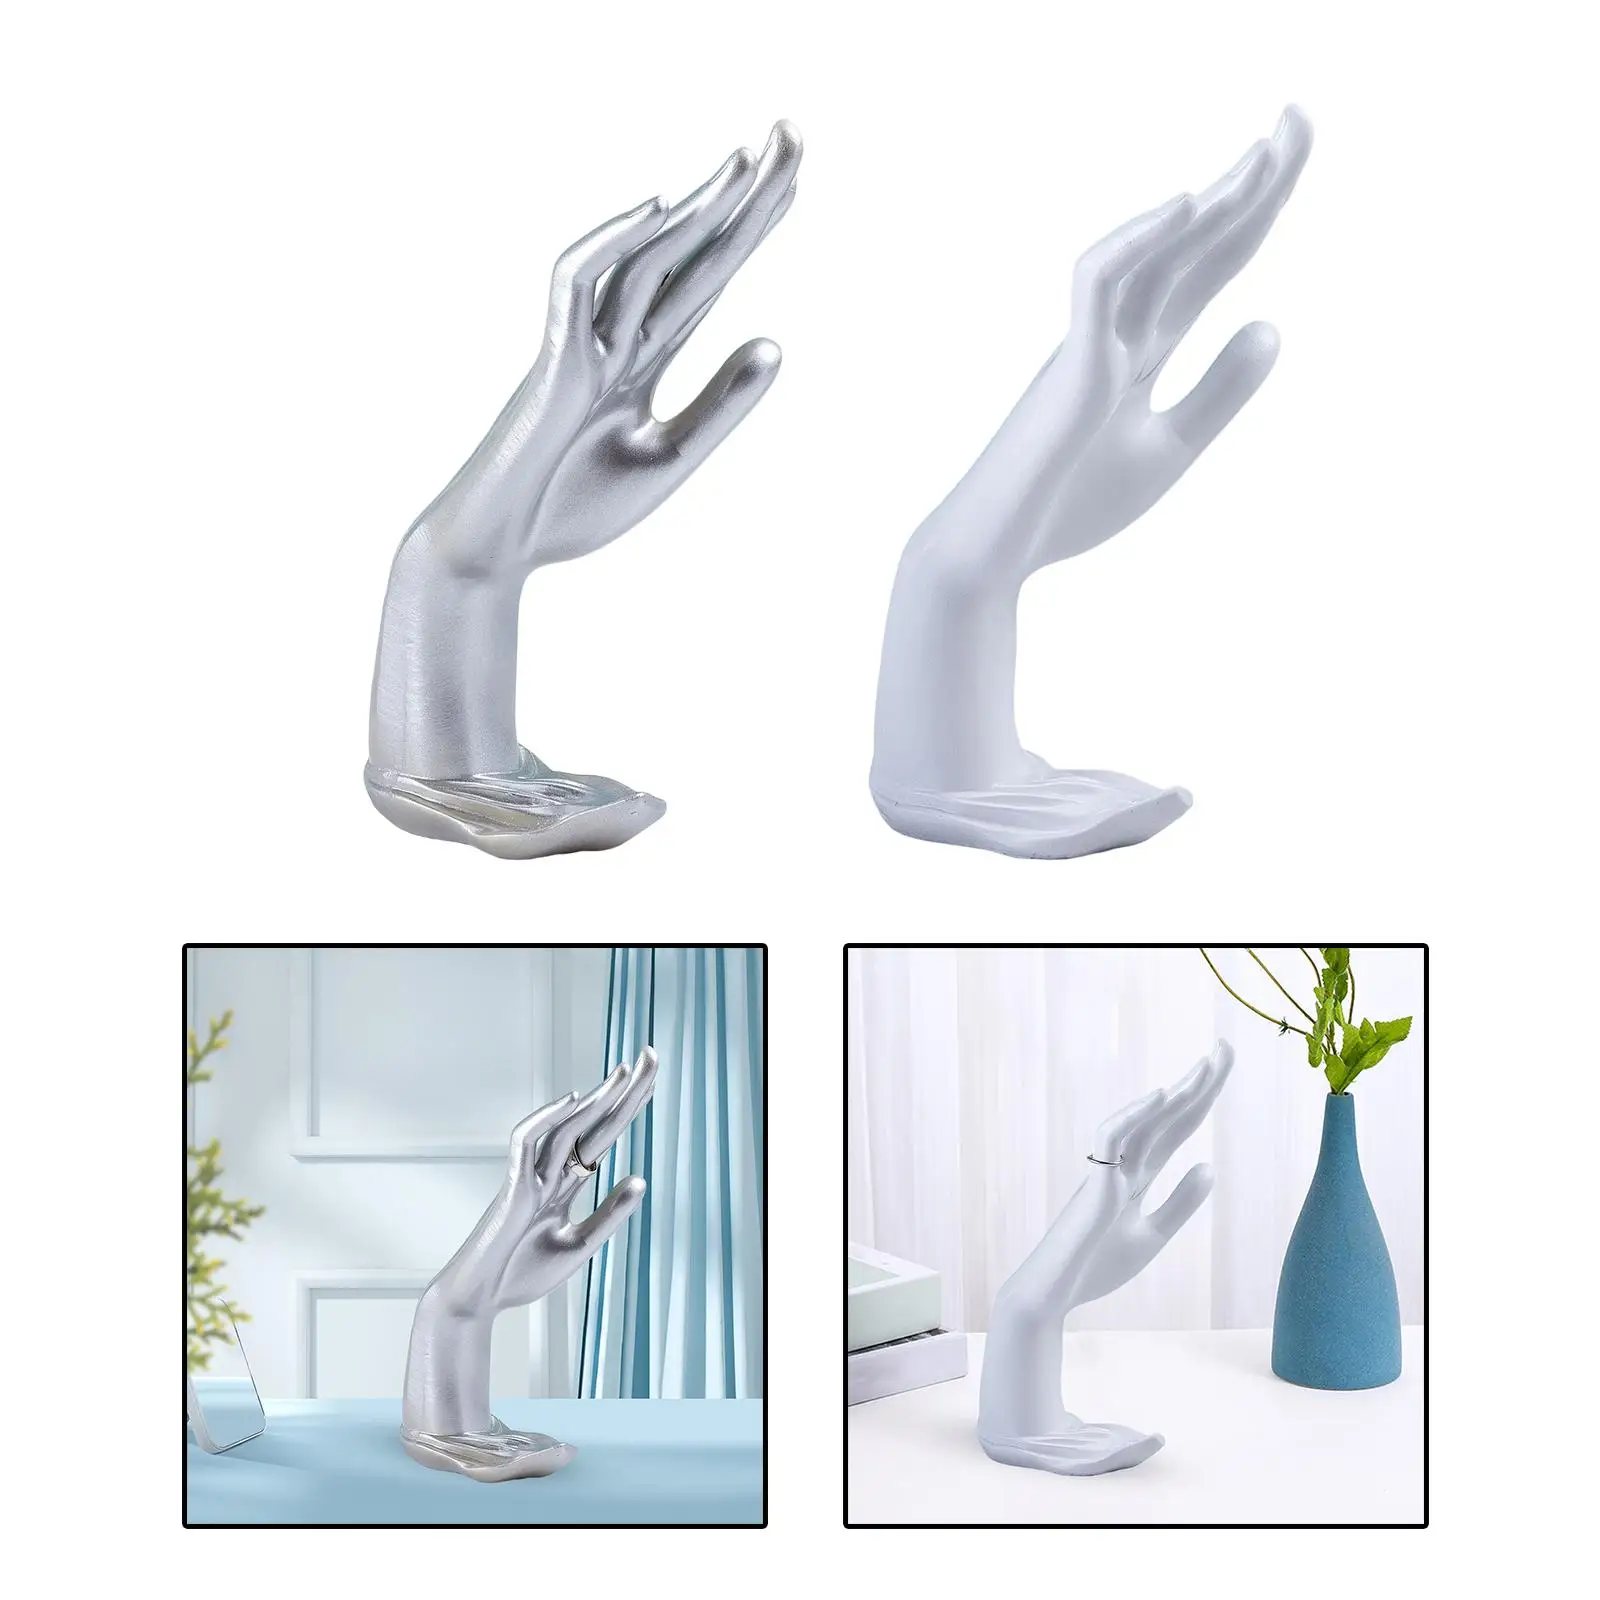 2 Pieces Rings Hand Holder Mannequin Hand Jewelry Organizer Home Decoration